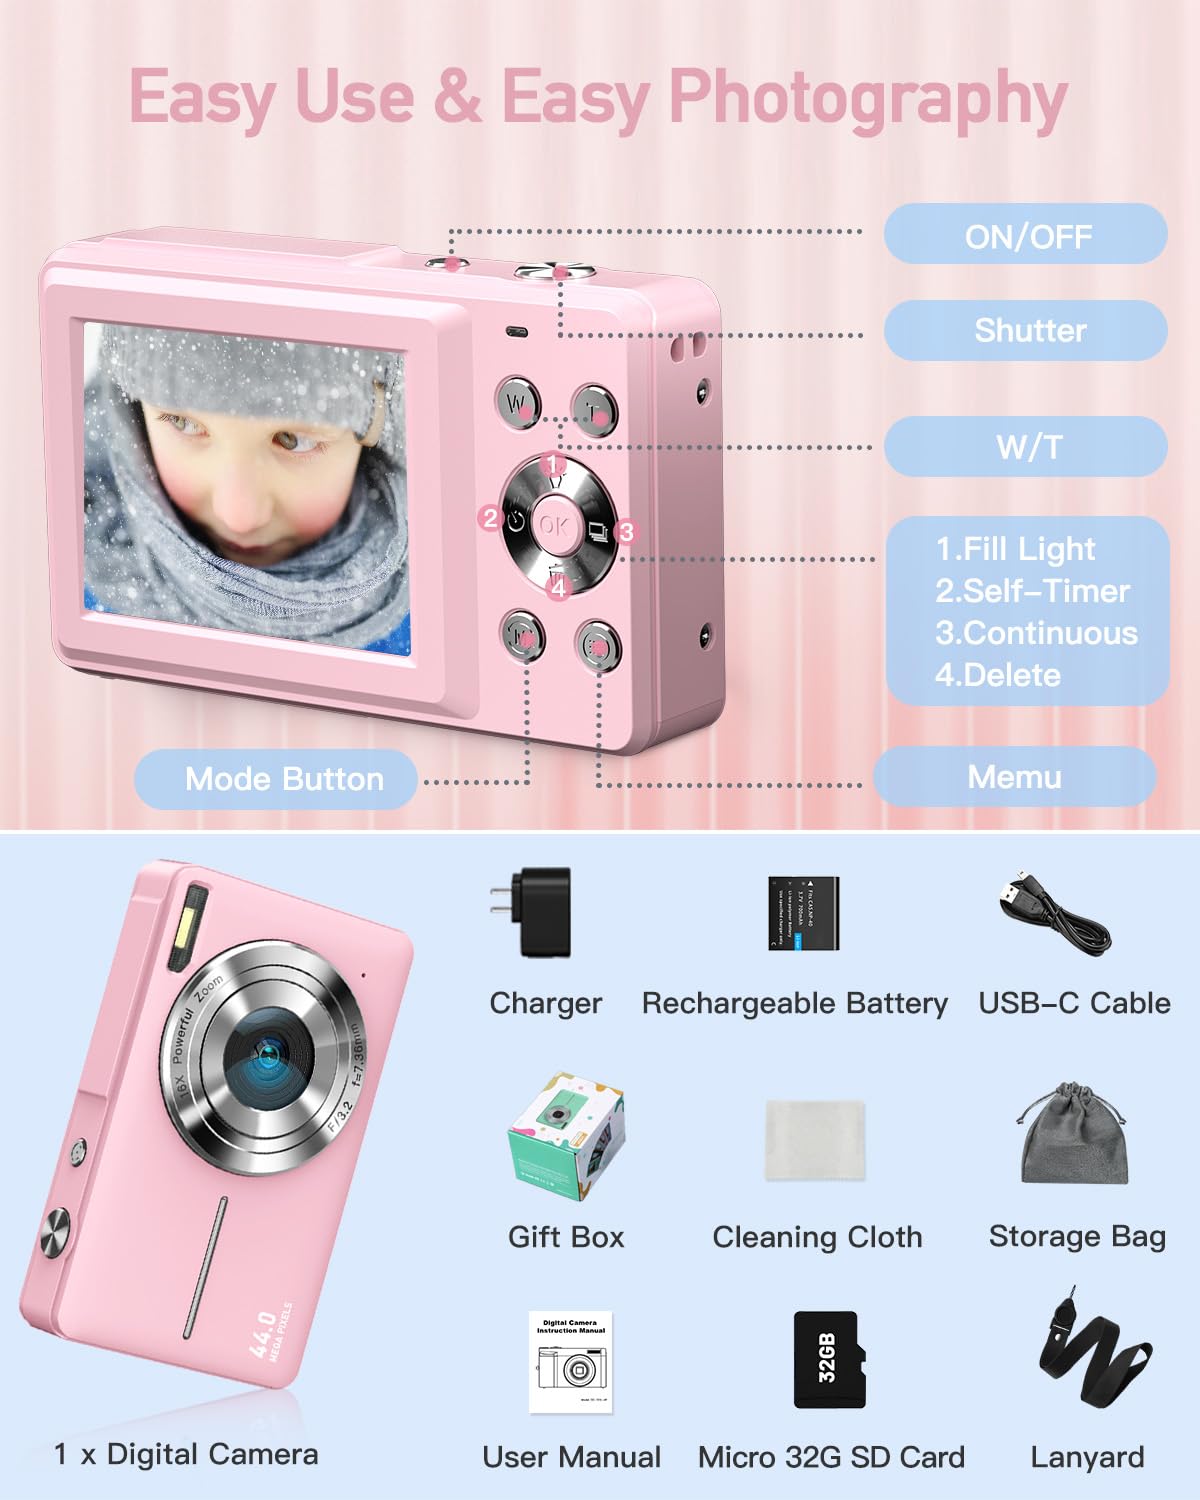 AiTechny Digital Camera for Kids, 1080P FHD Camera, 44MP Point and Shoot Digital Camera for Pictures with 32GB SD Card, 16X Zoom, Compact Small Vintage Camera Gifts for Teens Kids Boys Girls(Pink)